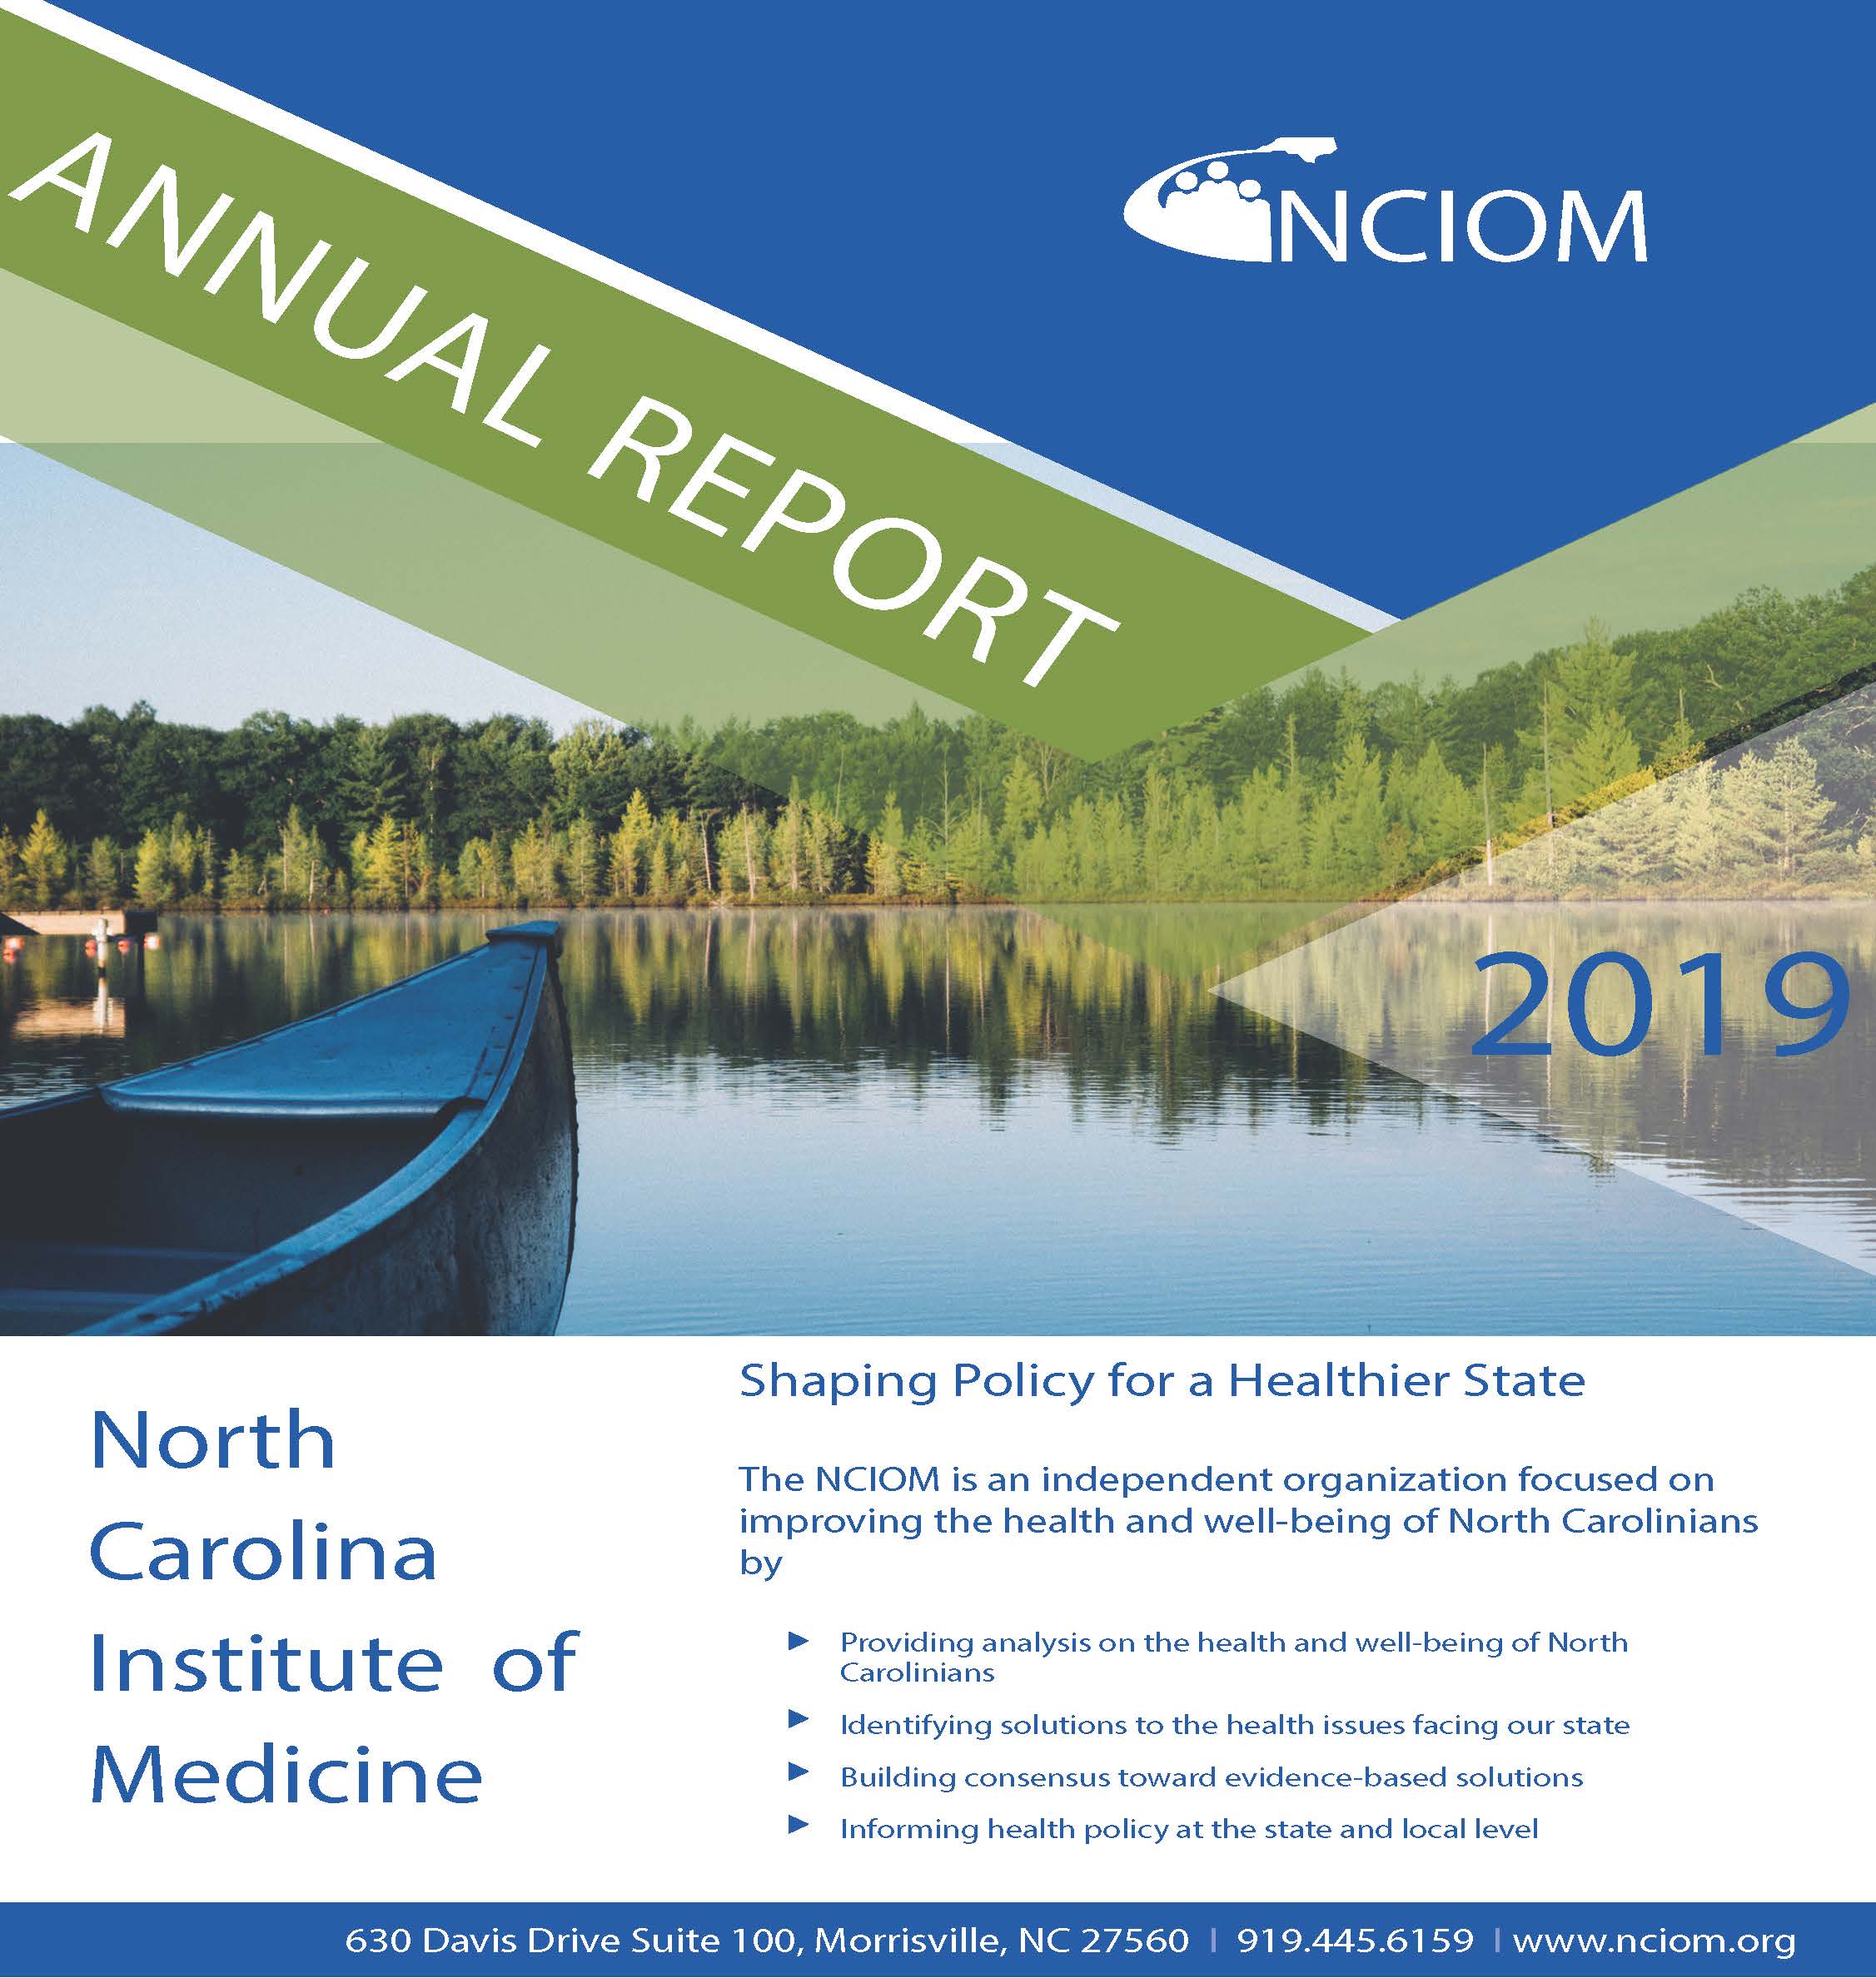 annual report cover with image of canoe on lake